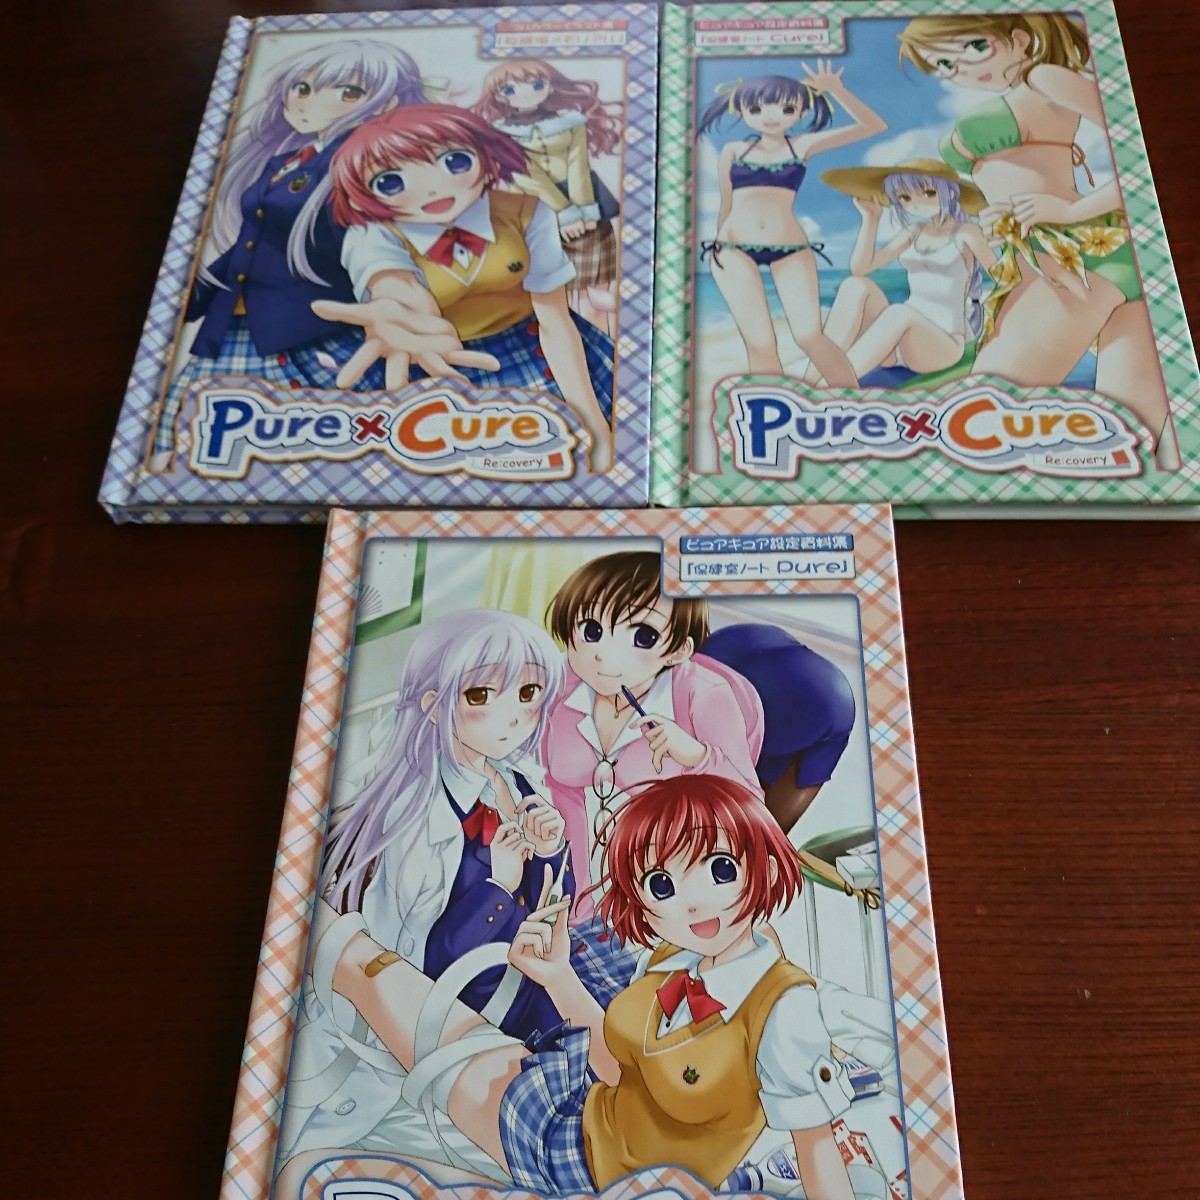 Pure×Cure Re:covery 恋の救急セット ps2 プレステ2 プレイステーション2